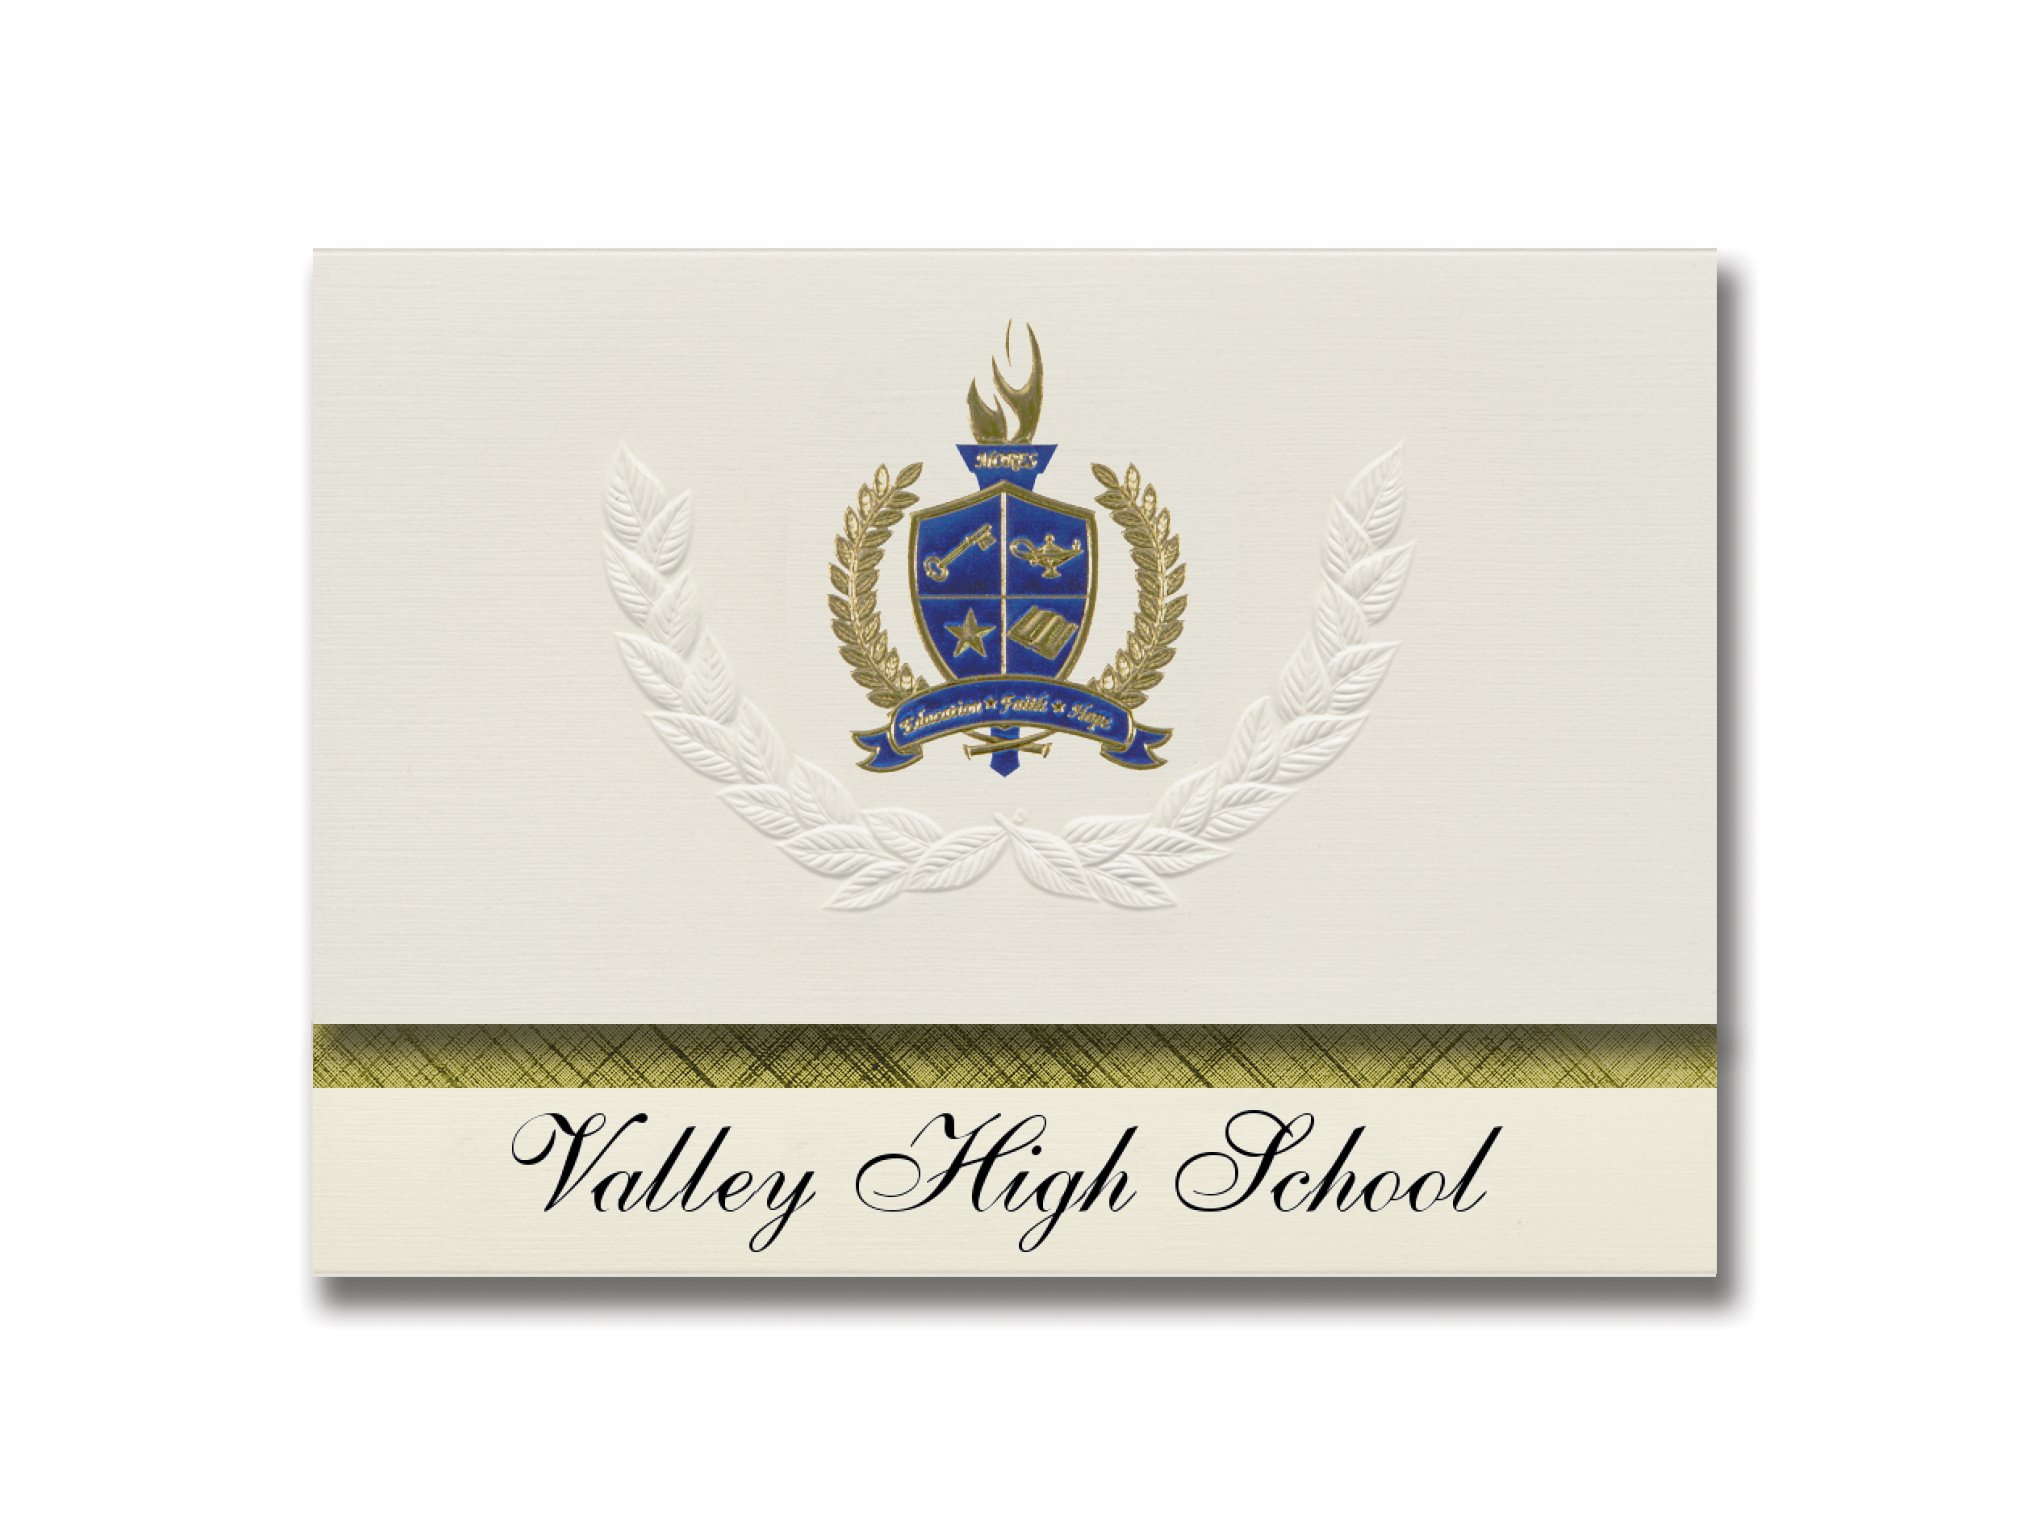 Signature Announcements Valley High School (Orderville, UT) Graduation Announcements, Presidential style, Elite package of 25 with Gold & Blue Meta...